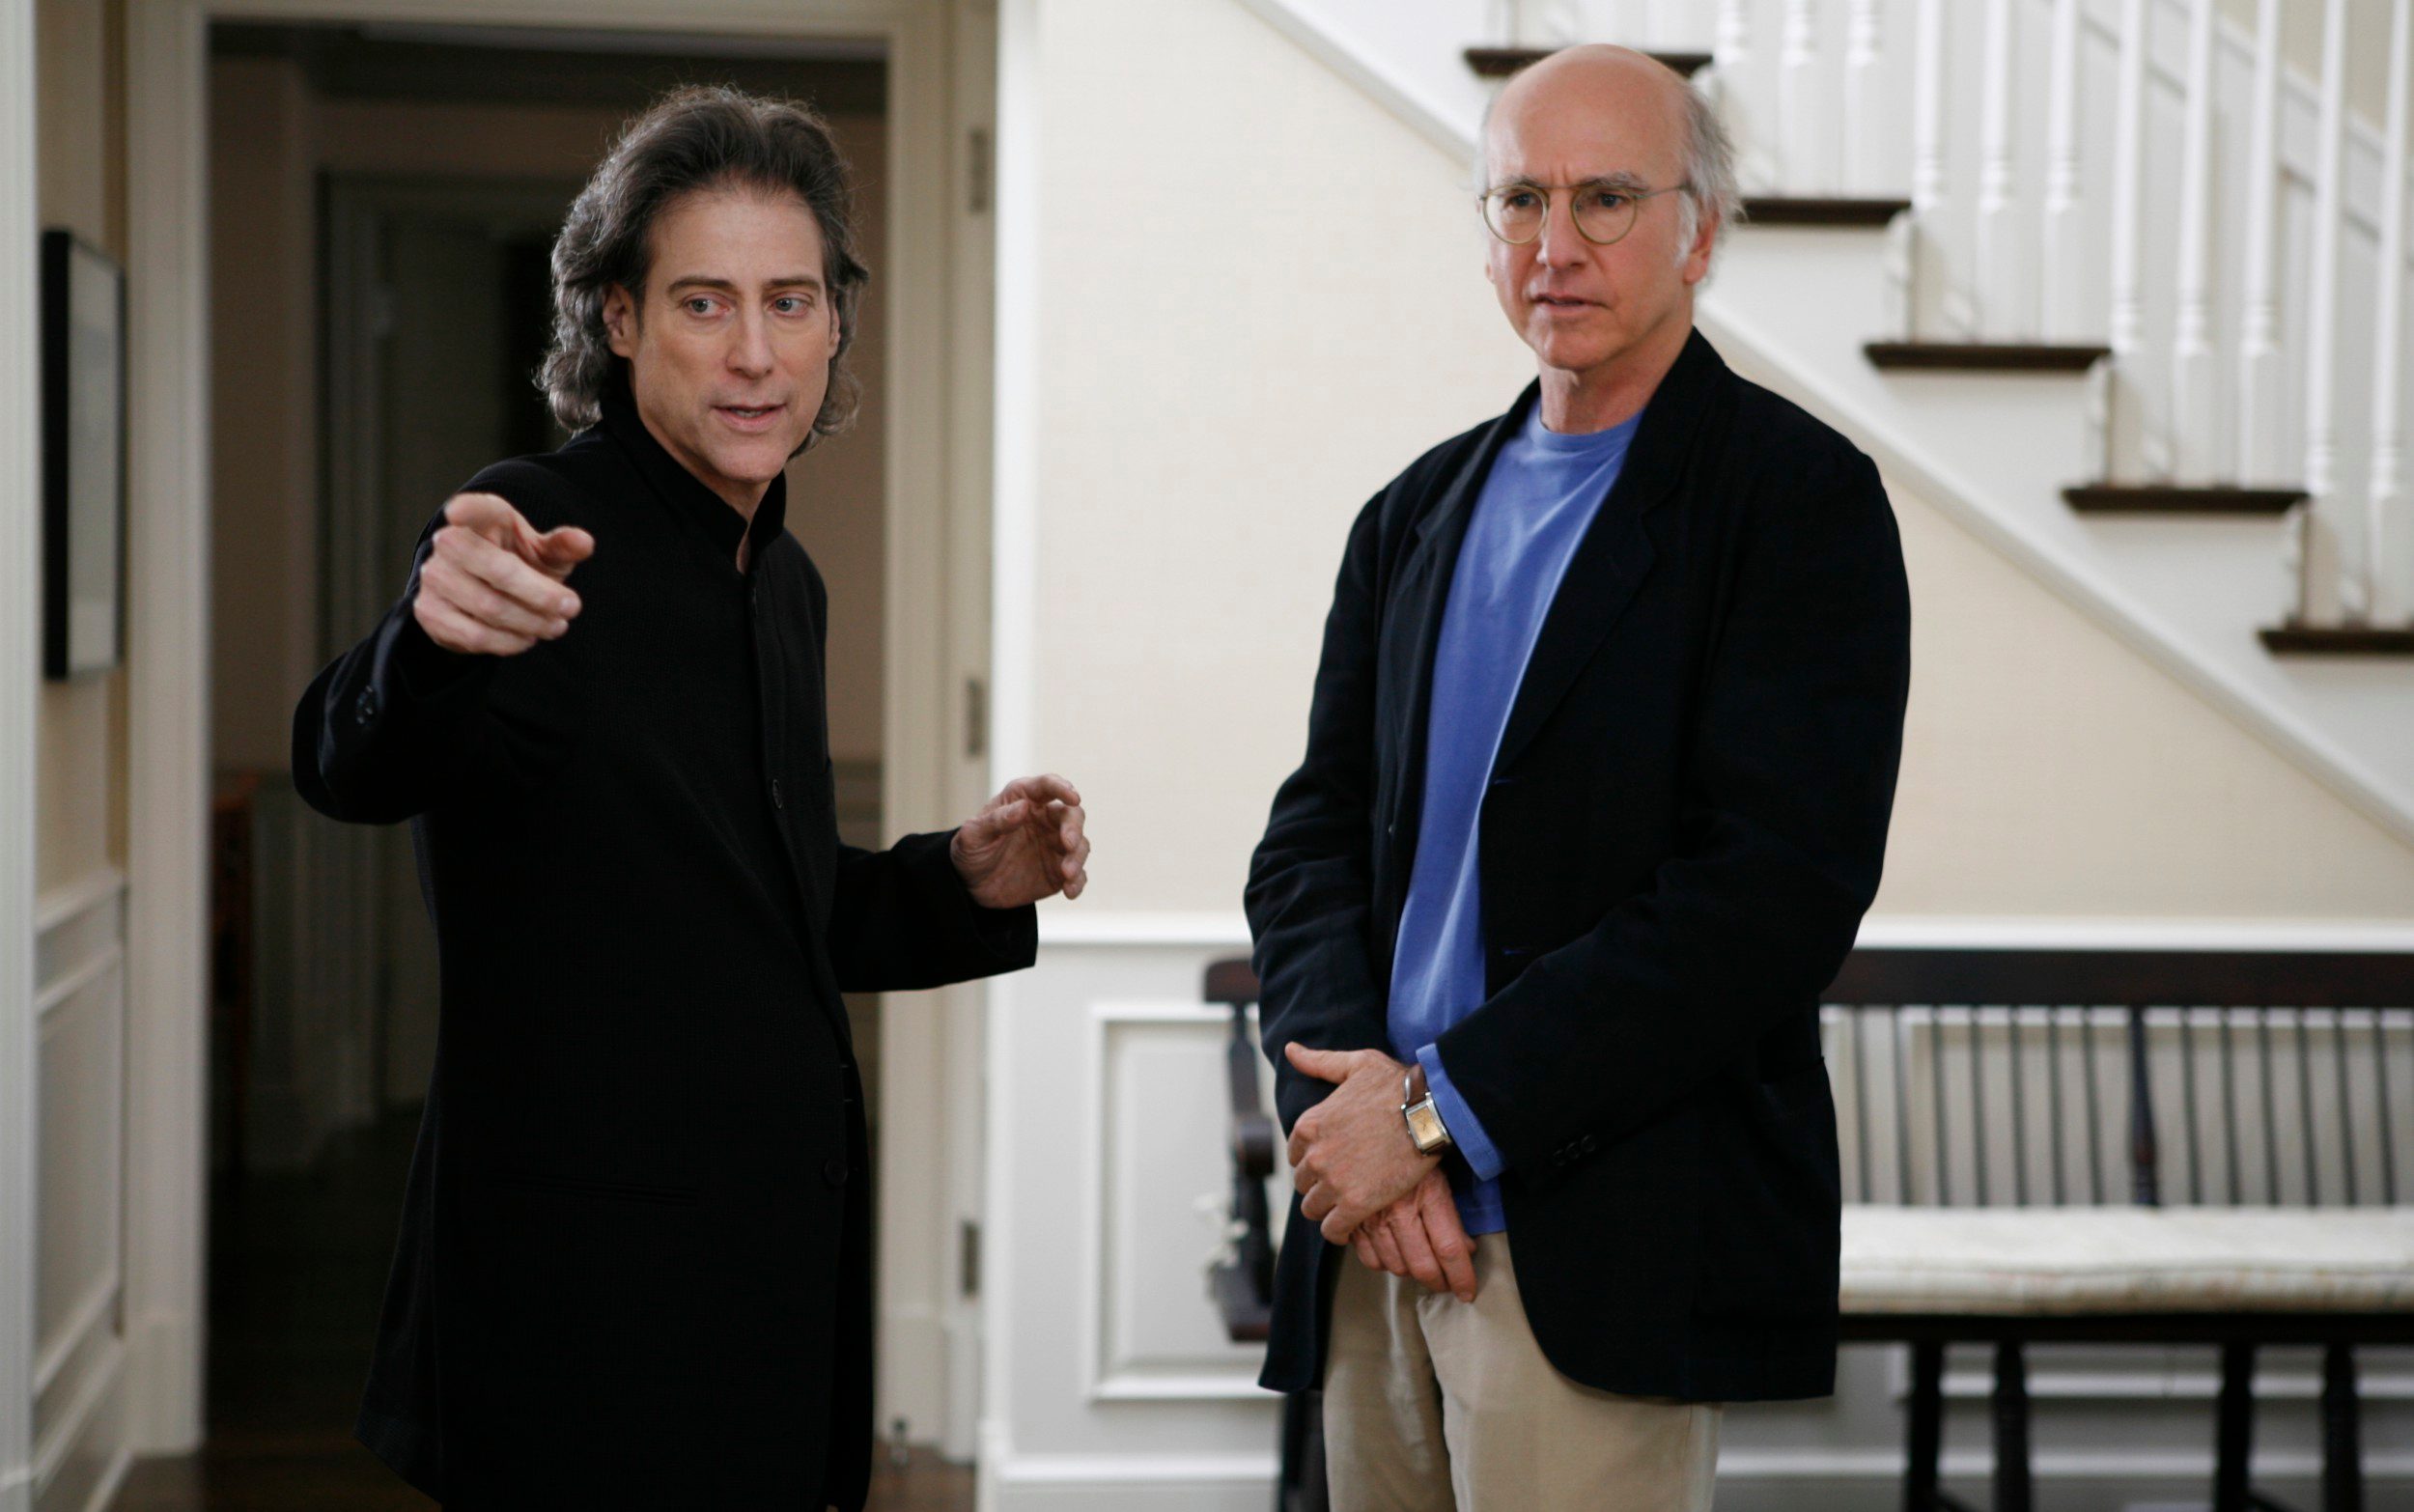 richard lewis, comedian and actor much-loved as larry david’s pal in curb your enthusiasm – obituary